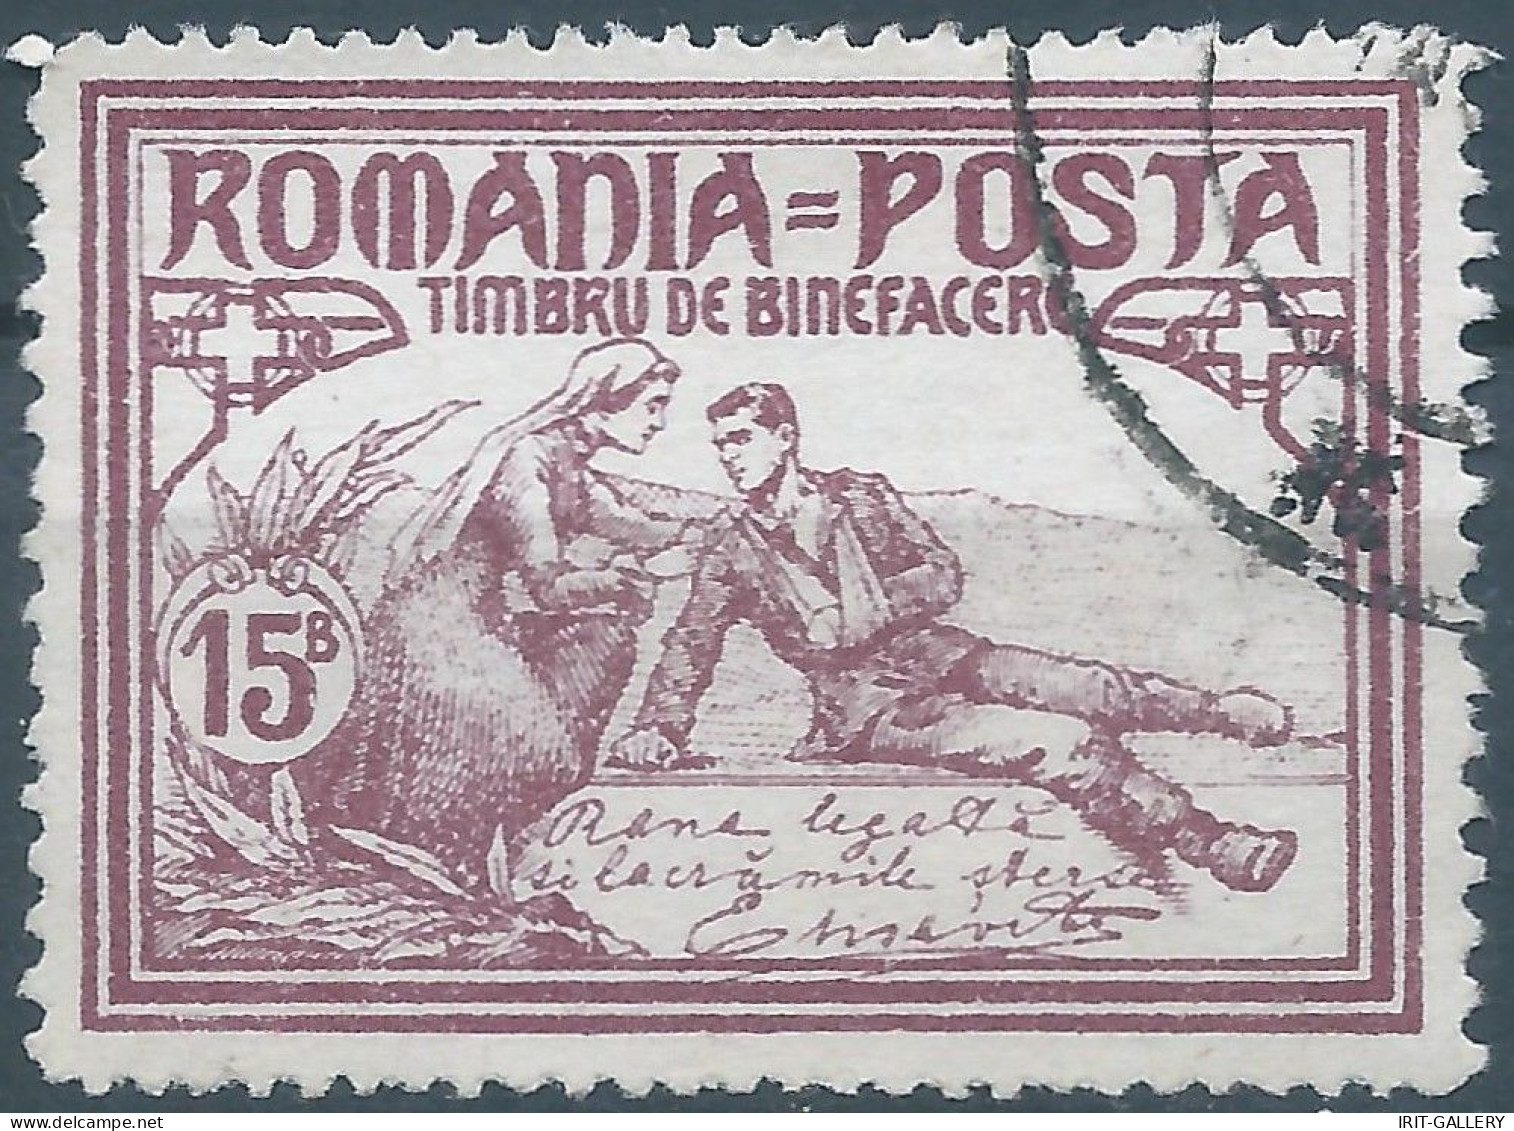 ROMANIA - ROUMANIE - RUMANIEN,1906 Burse And Soldier,15B,Oblitérée,Value:€10,00 - Used Stamps